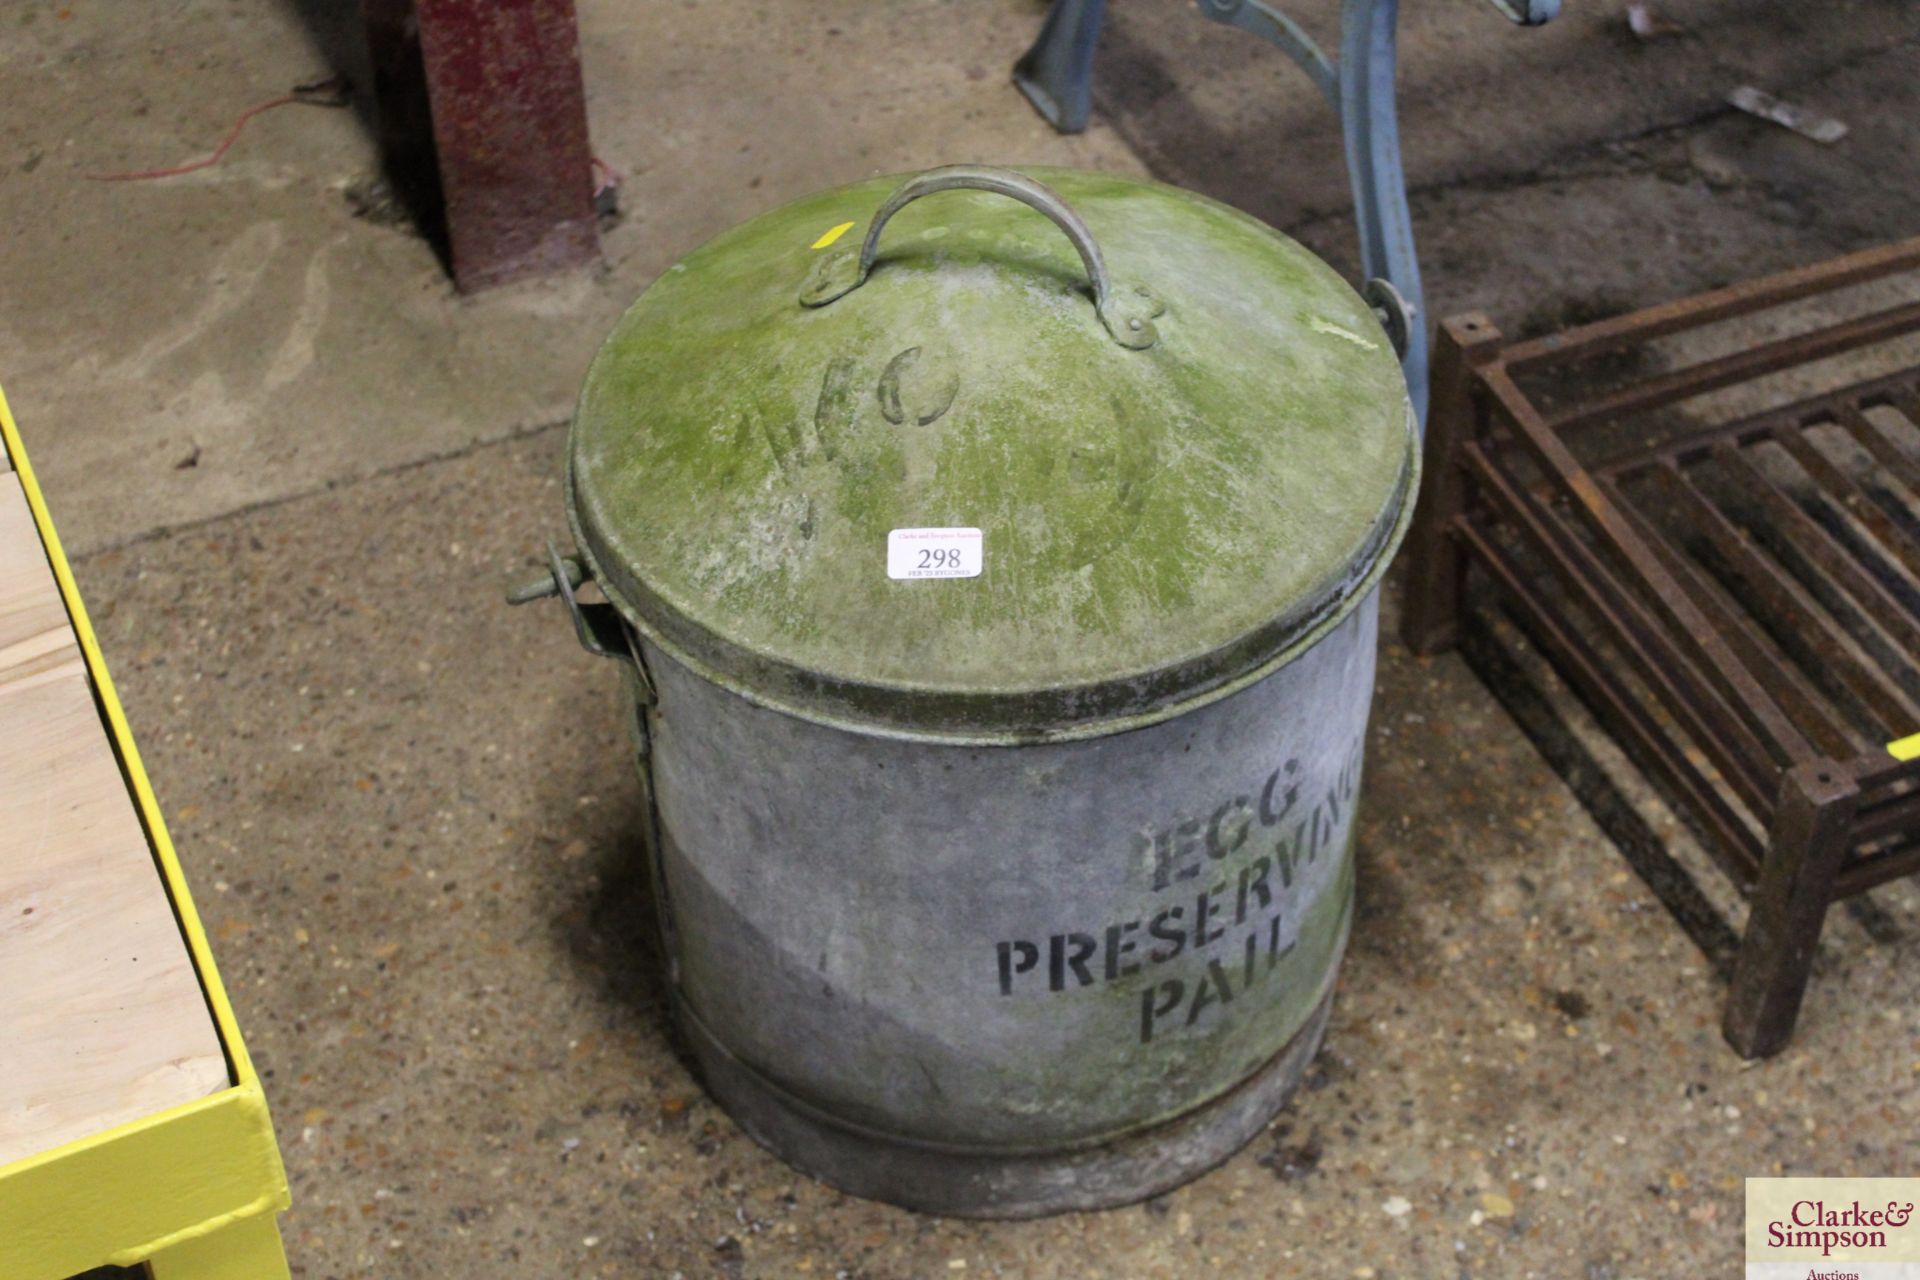 A galvanised lidded egg preserving pail